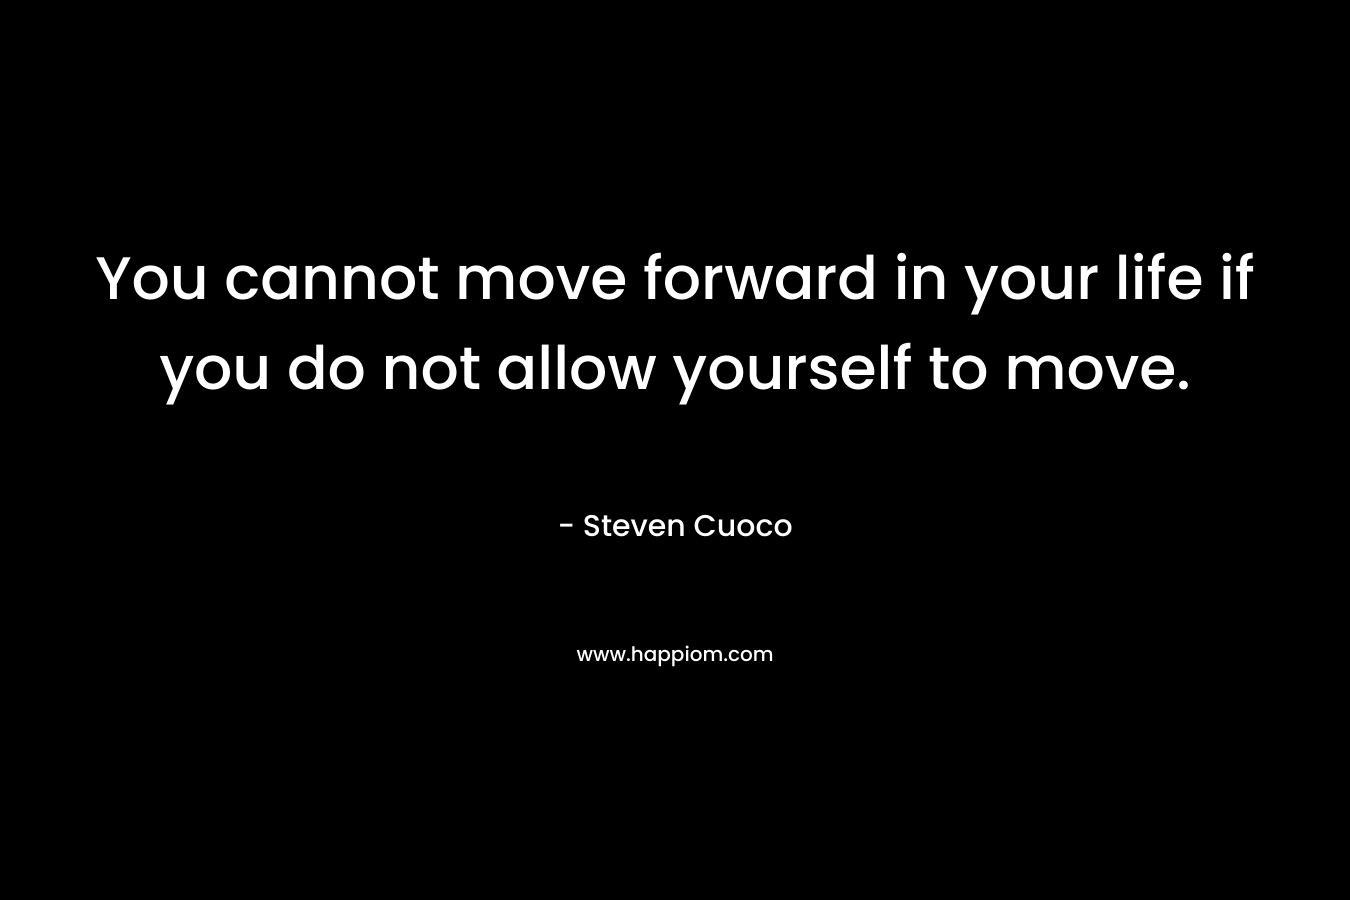 You cannot move forward in your life if you do not allow yourself to move.